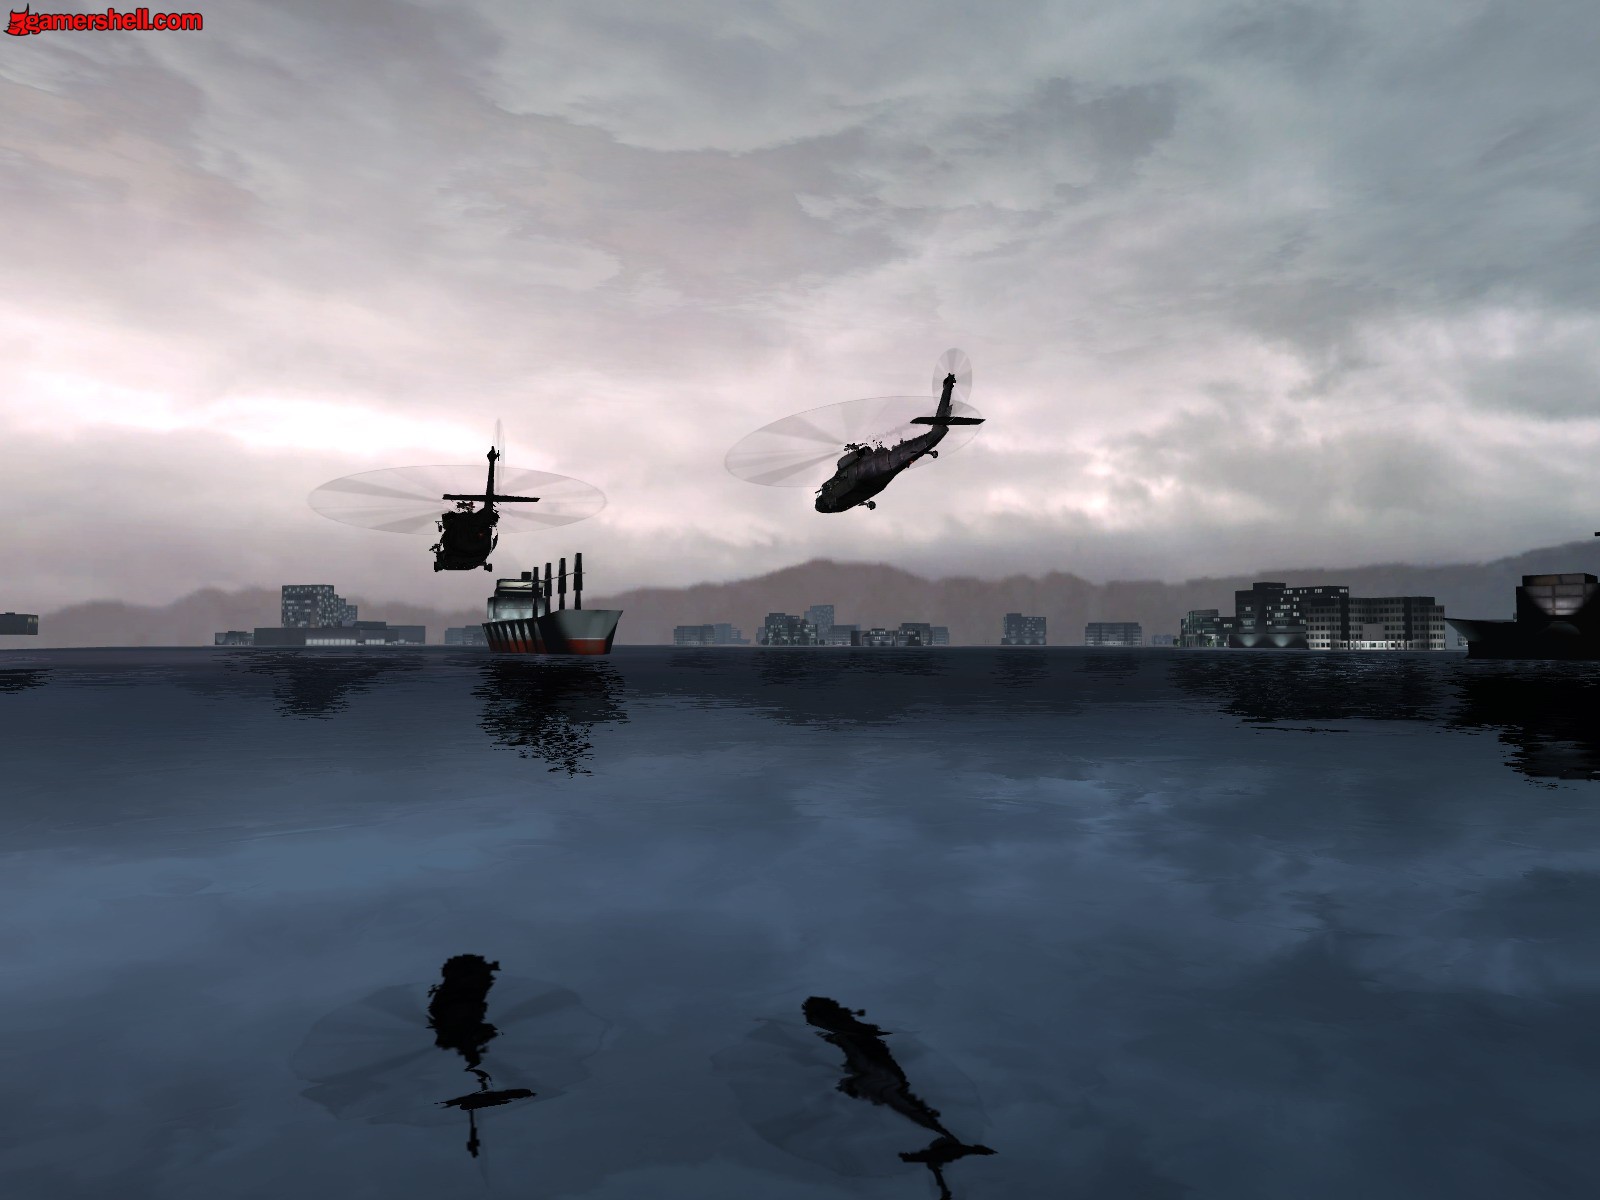 A scenic view of a town near water with a ship, helicopter, and cloudy sky.